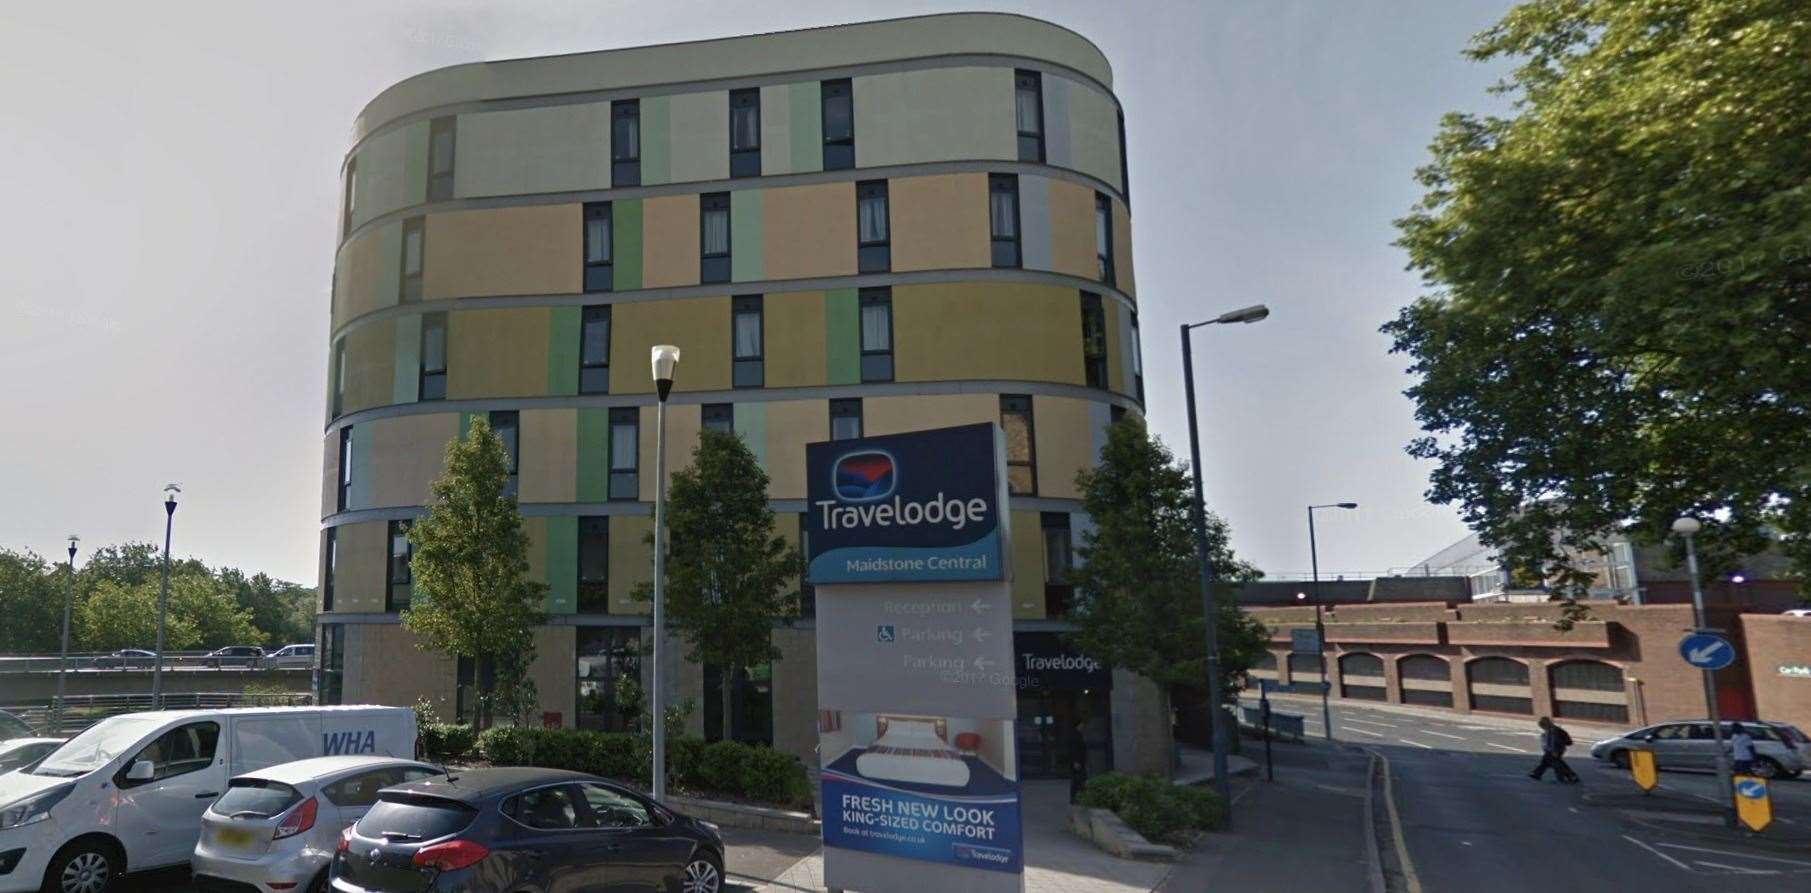 Travelodge in Maidstone. Picture: Google Street View